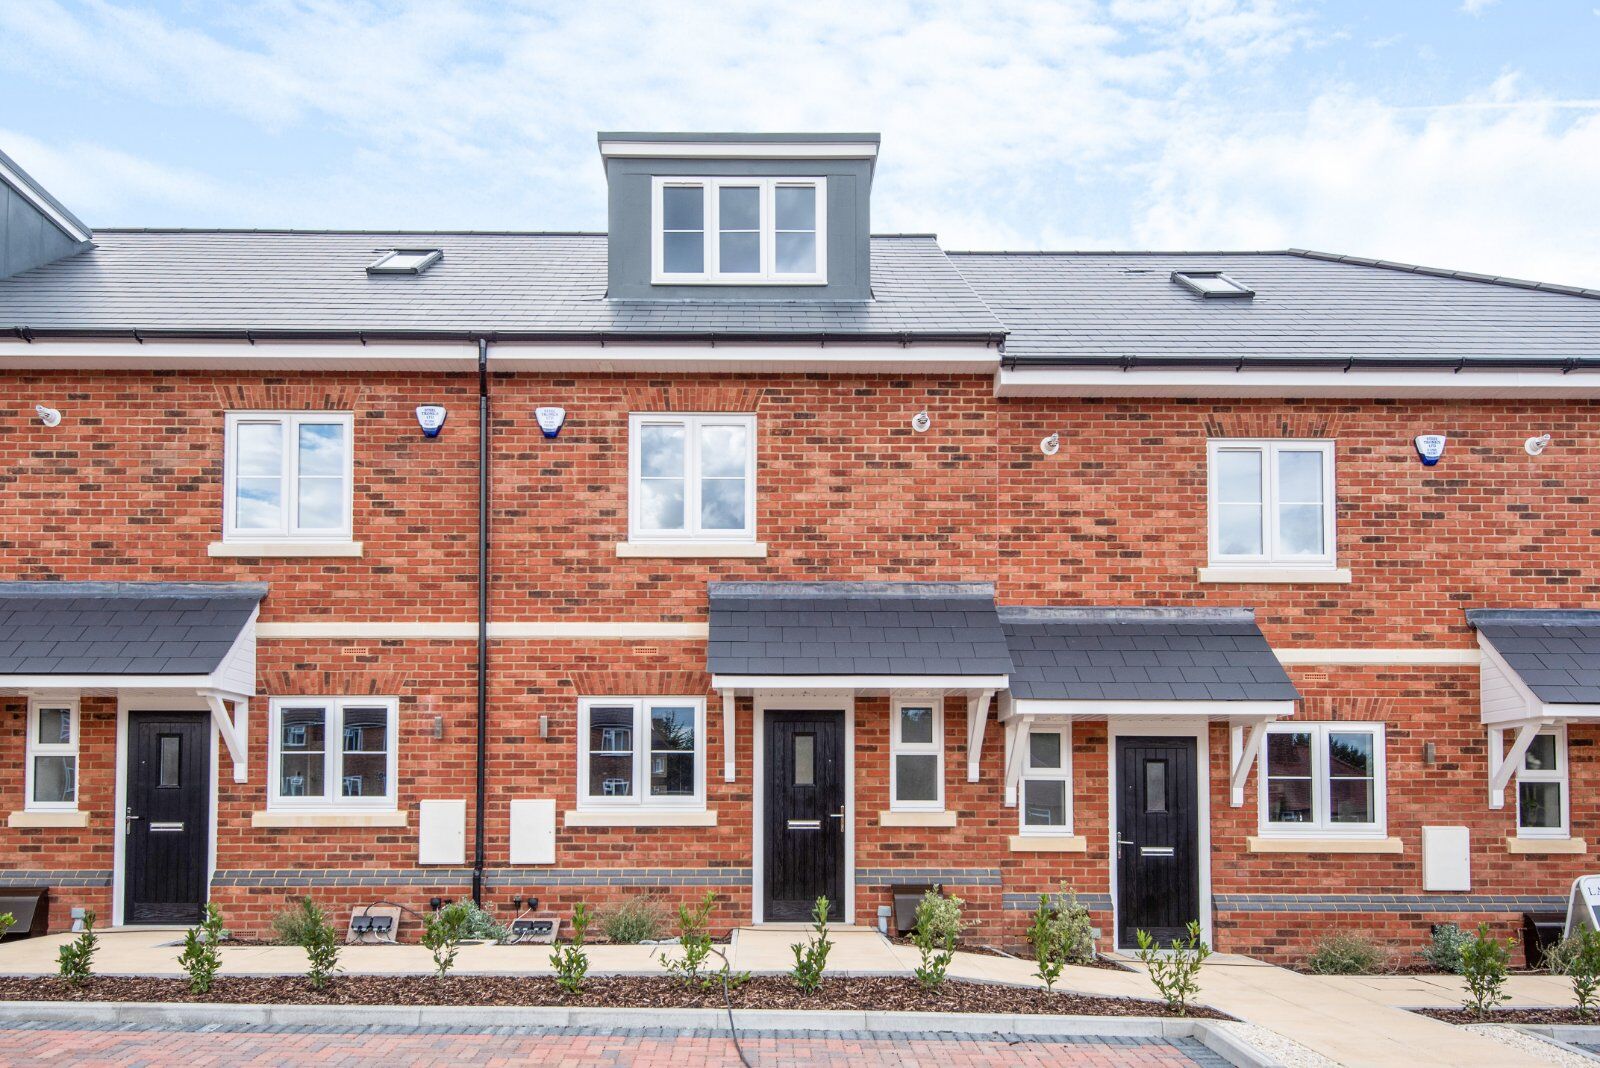 3 bedroom mid terraced house for sale Highgrove Close, Loughton, IG10, main image